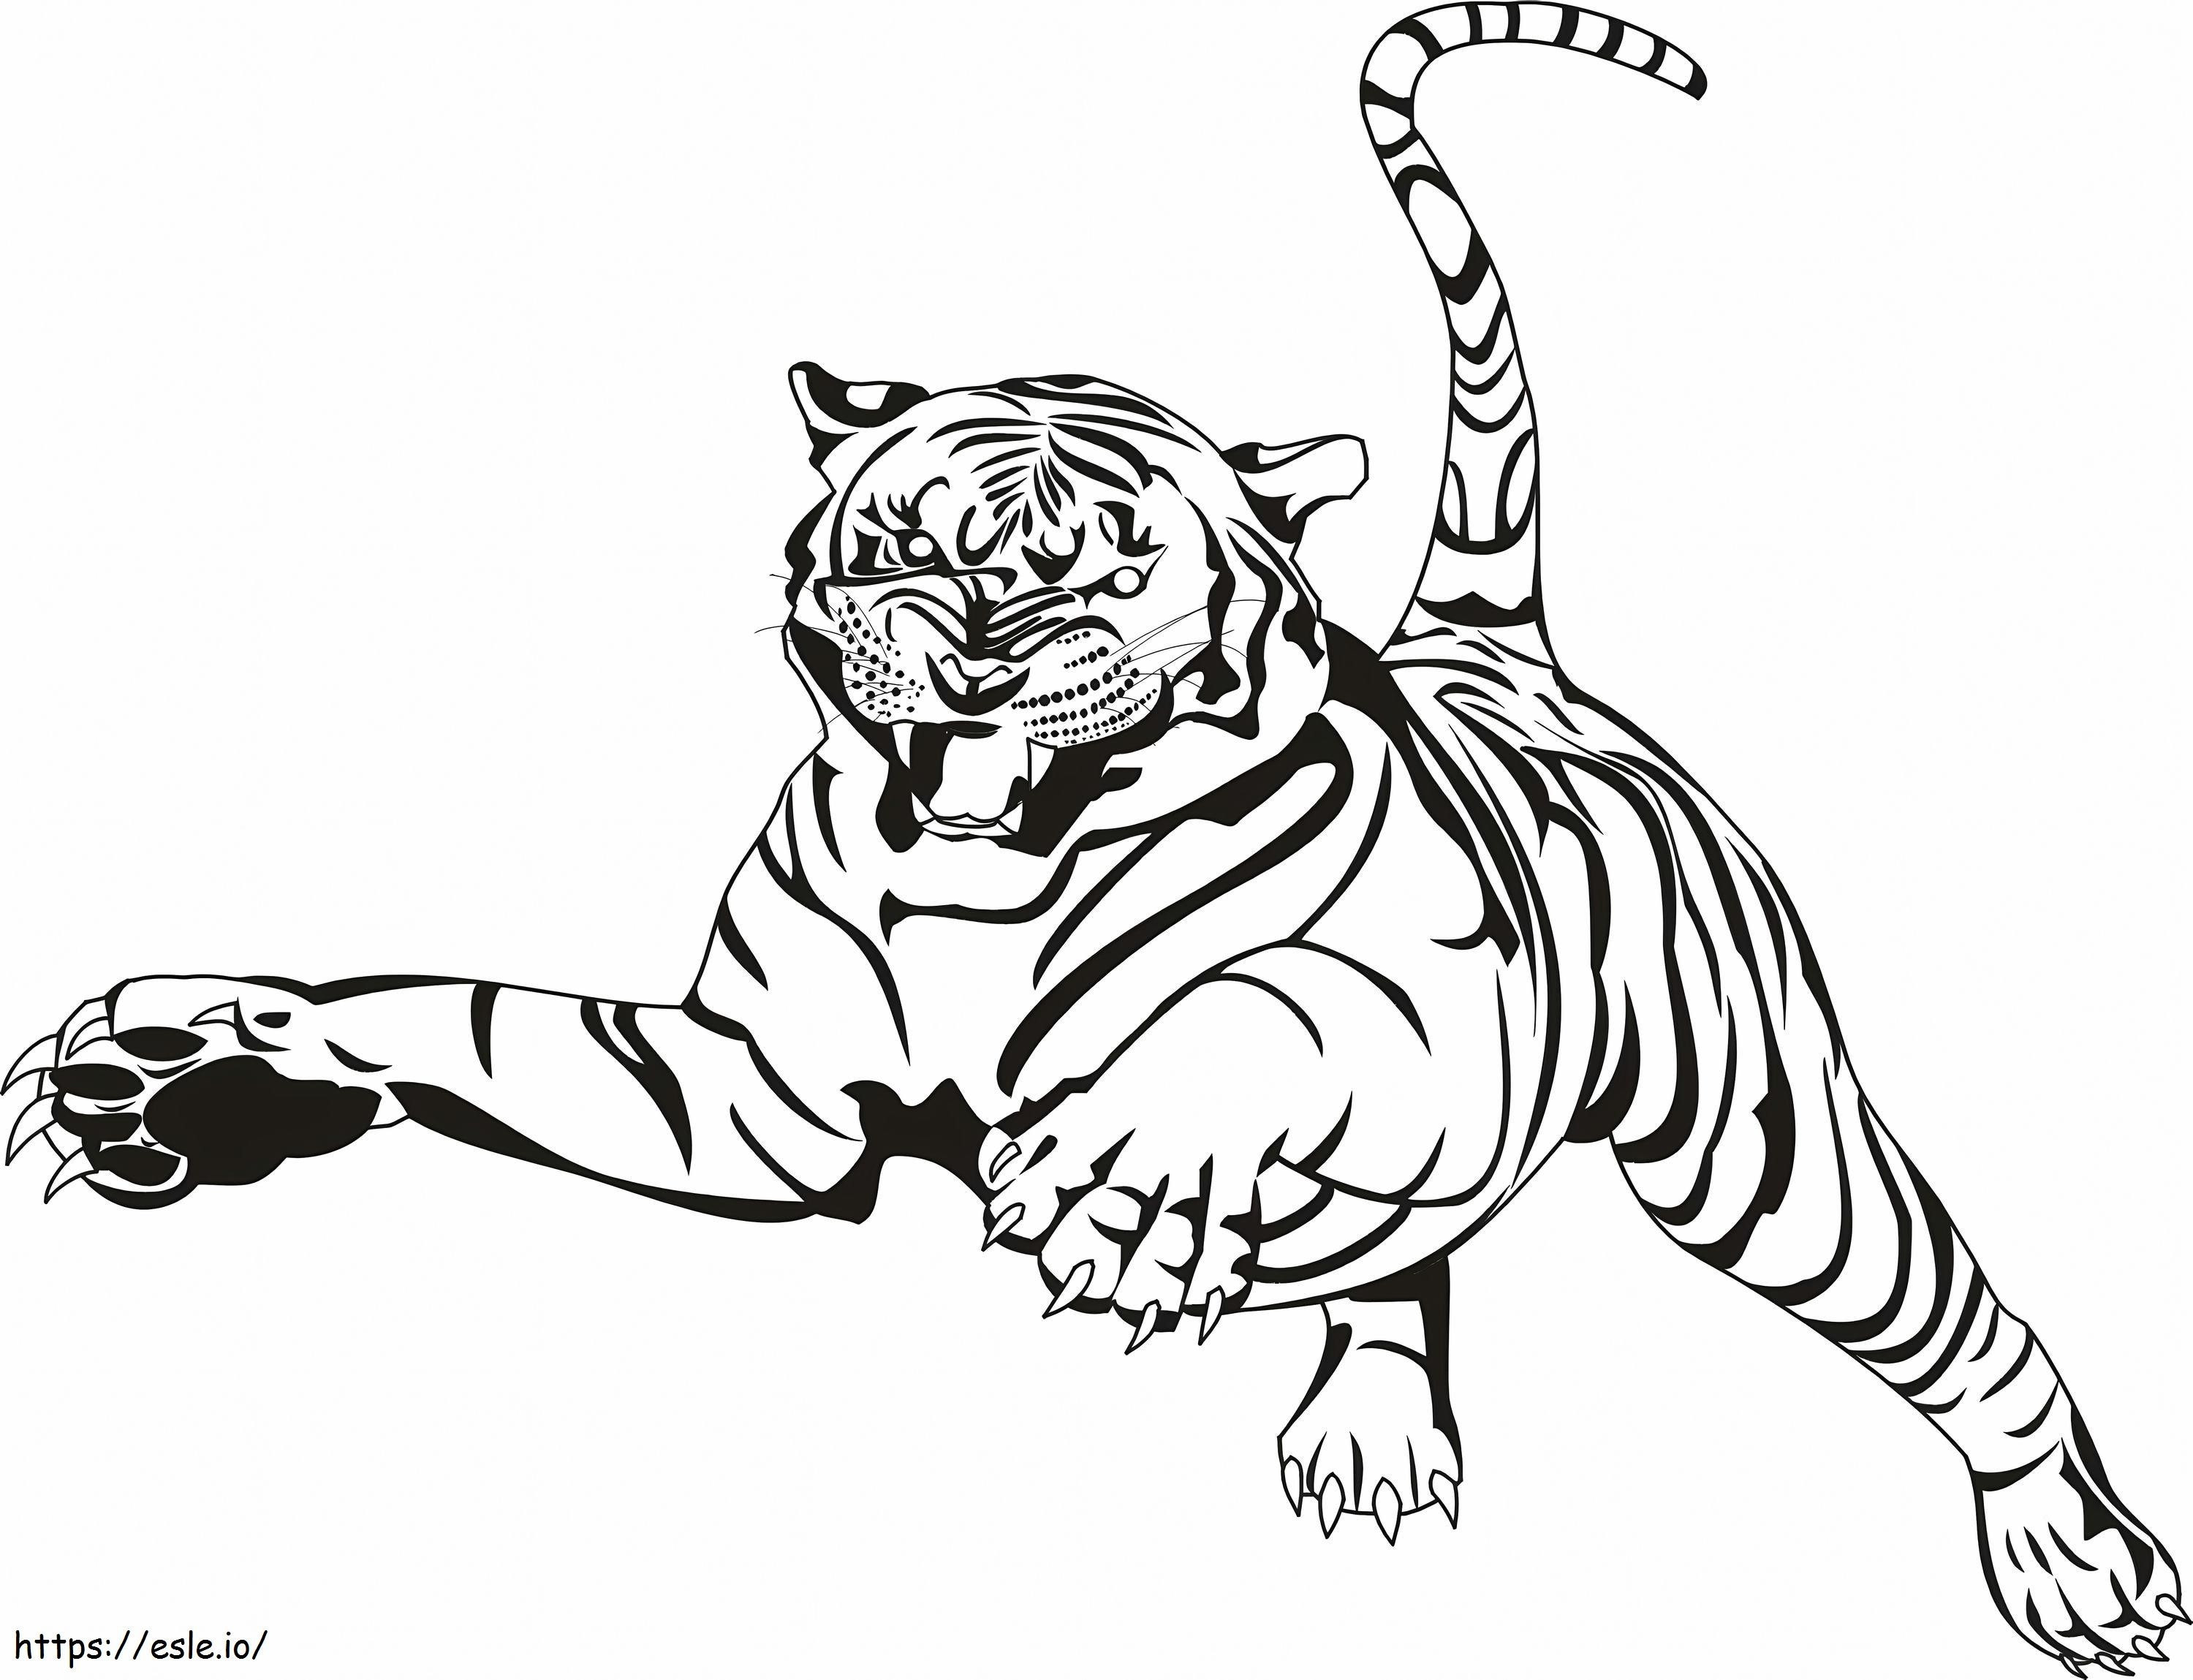 1542596523 1539833799 Informative Saber Tooth Tiger Free Fresh Tigers 1599 1225 coloring page